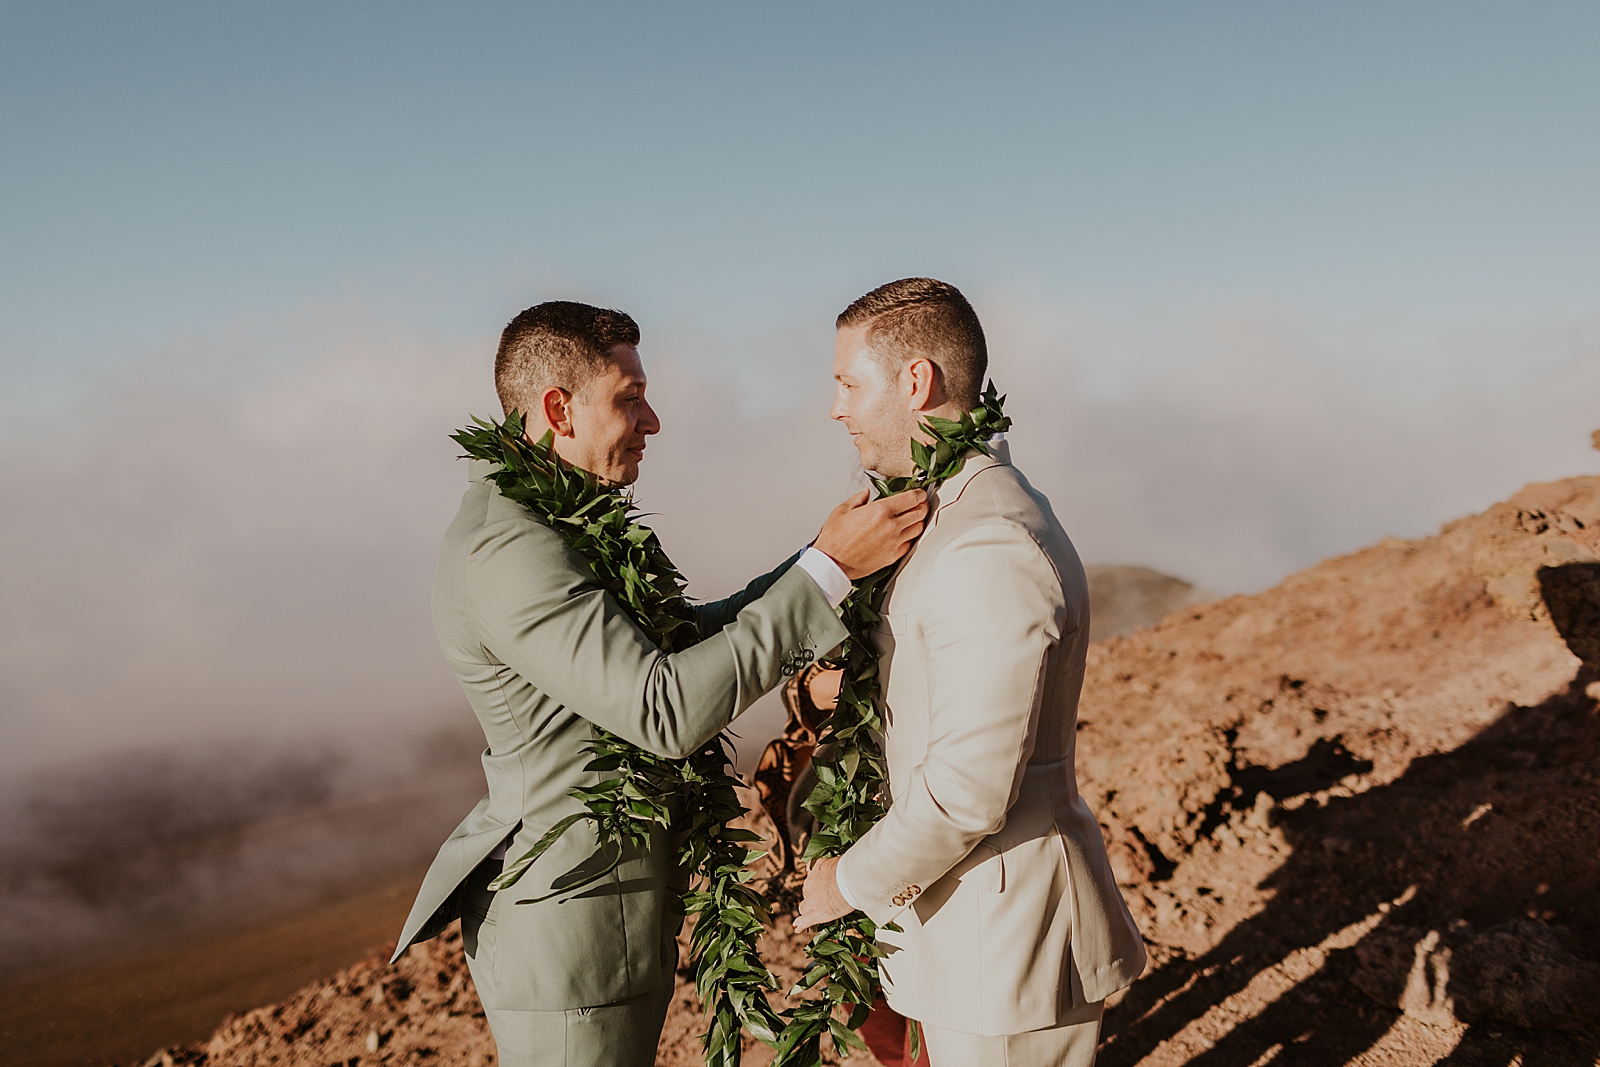 Grooms putting leis on each other for Elopement Ceremony